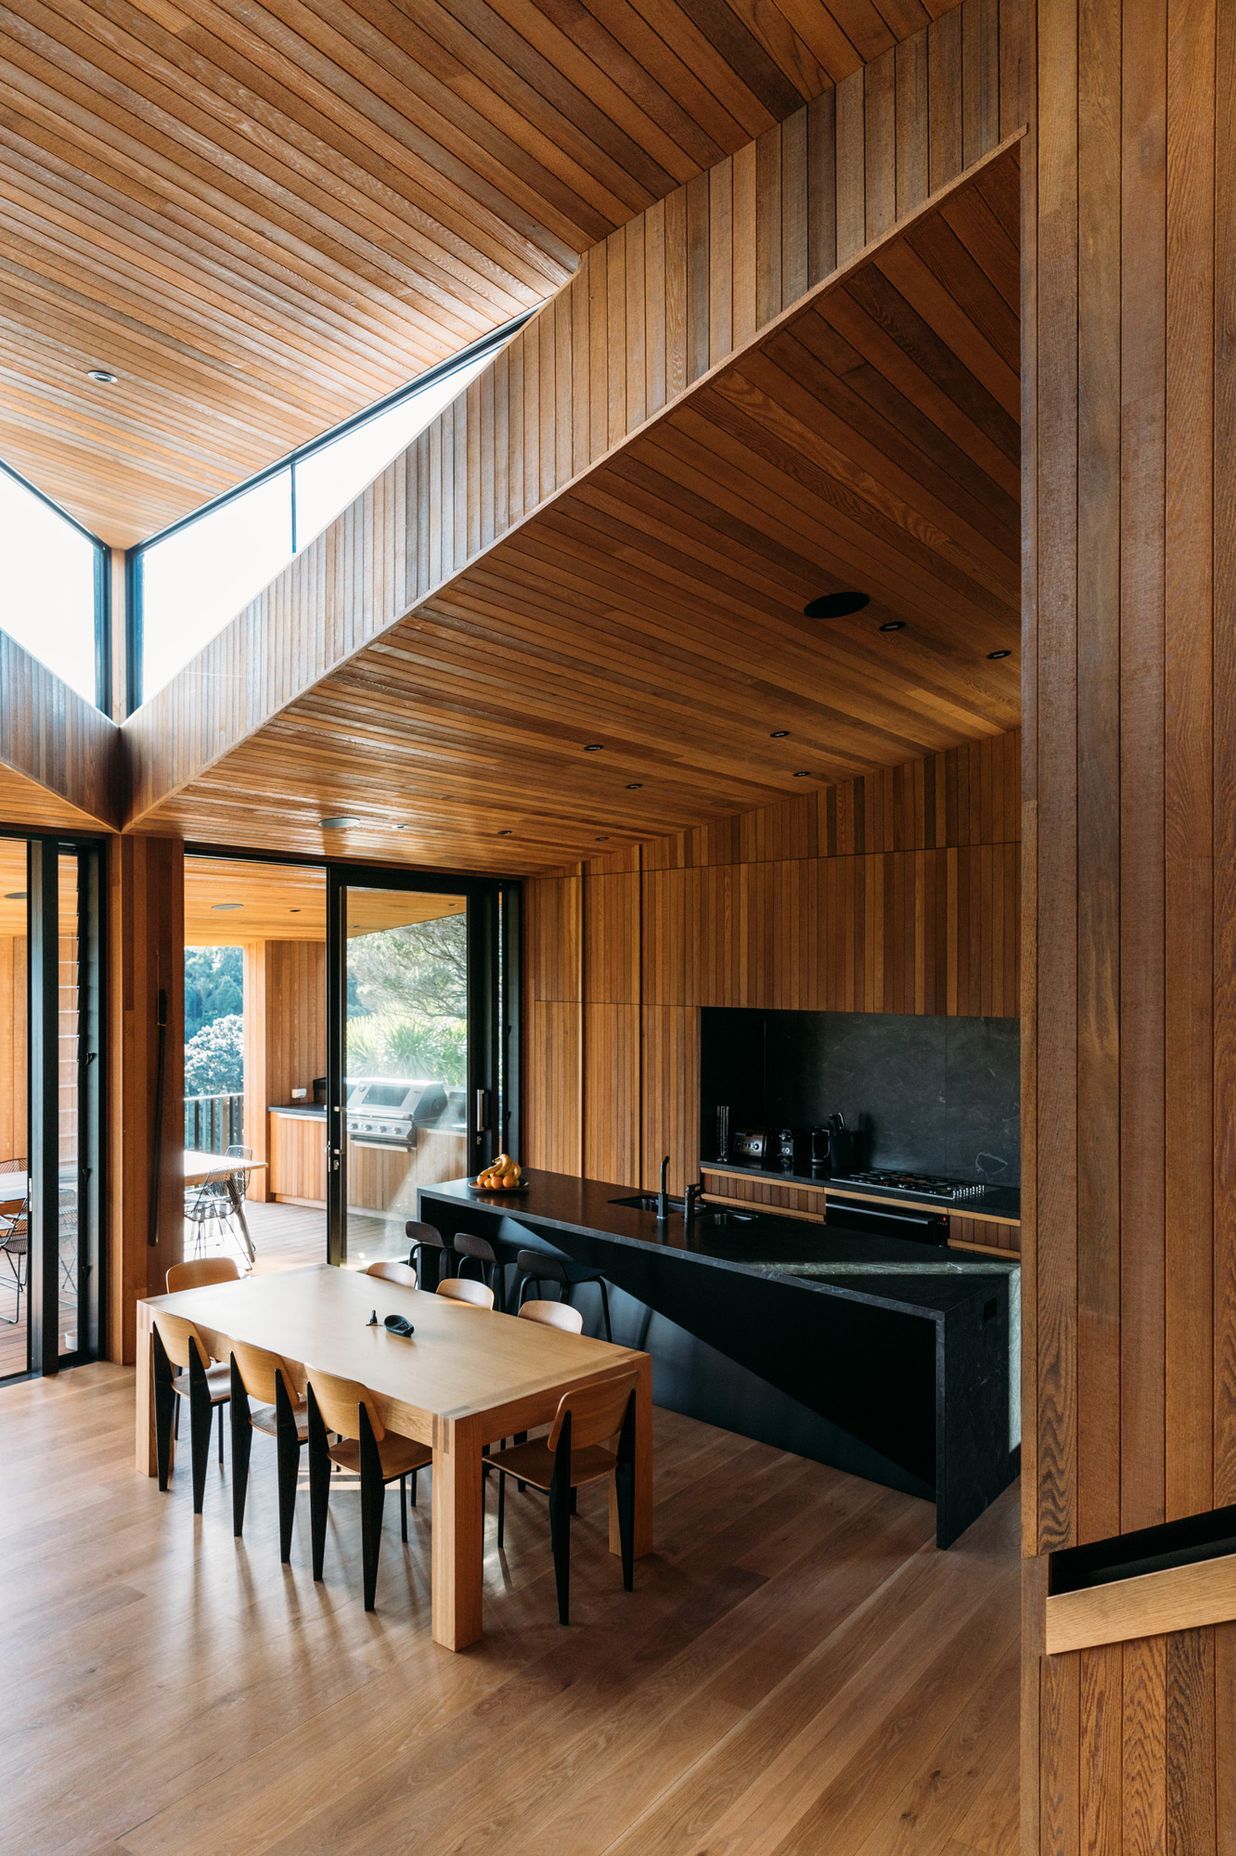 The architect wanted the stark exterior to give way to a rich, timber-lined interior that referenced, in a contemporary way, the area's original baches that sprang up post-WWII